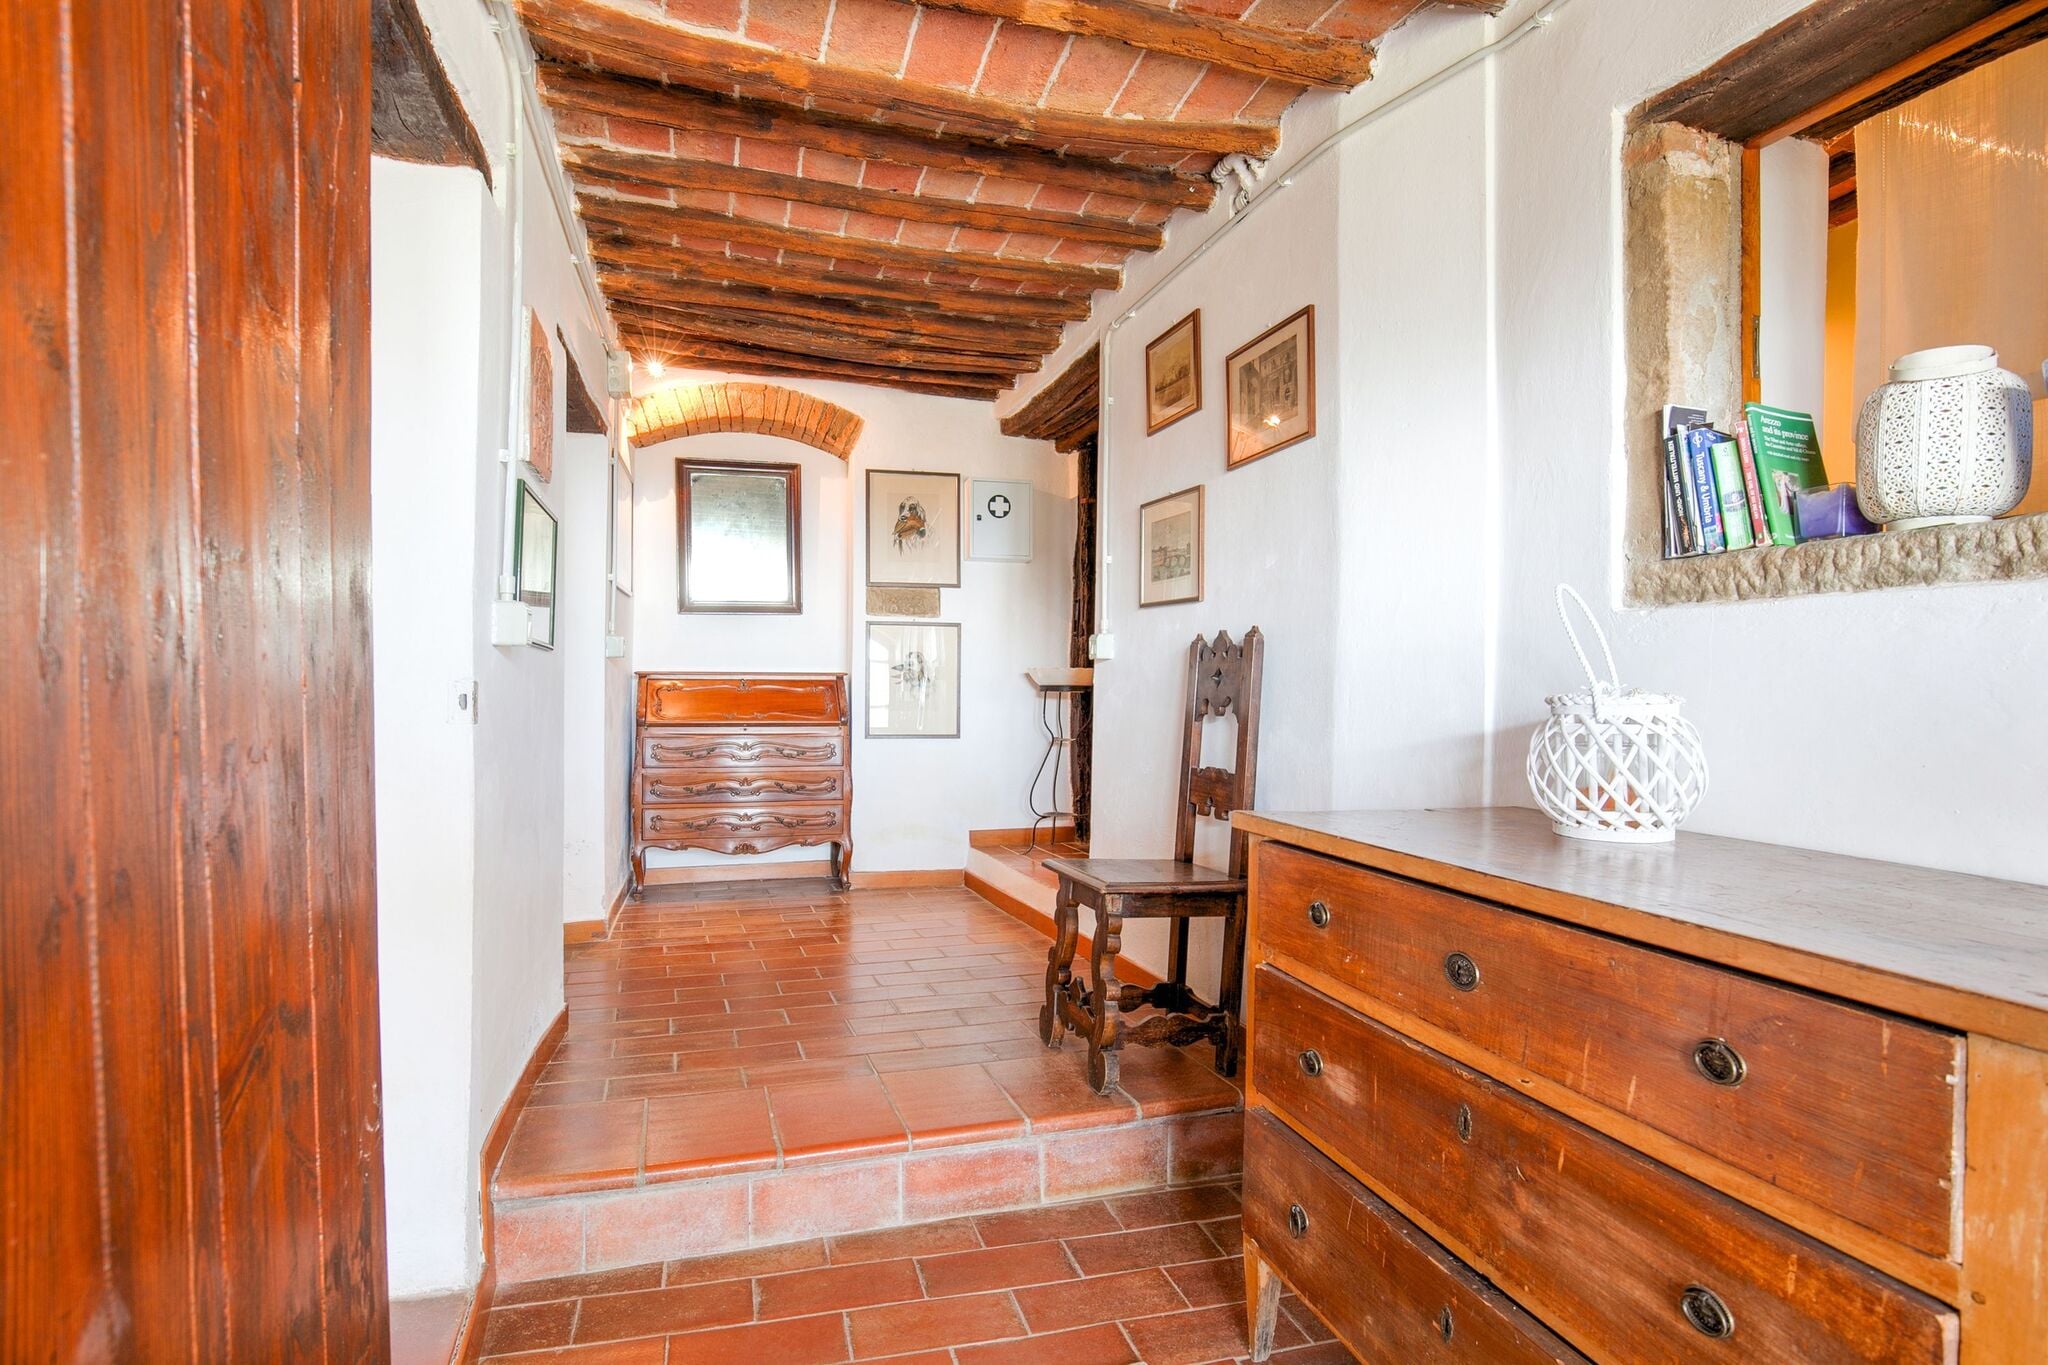 A beautiful, traditional Tuscan hamlet in the hills.

